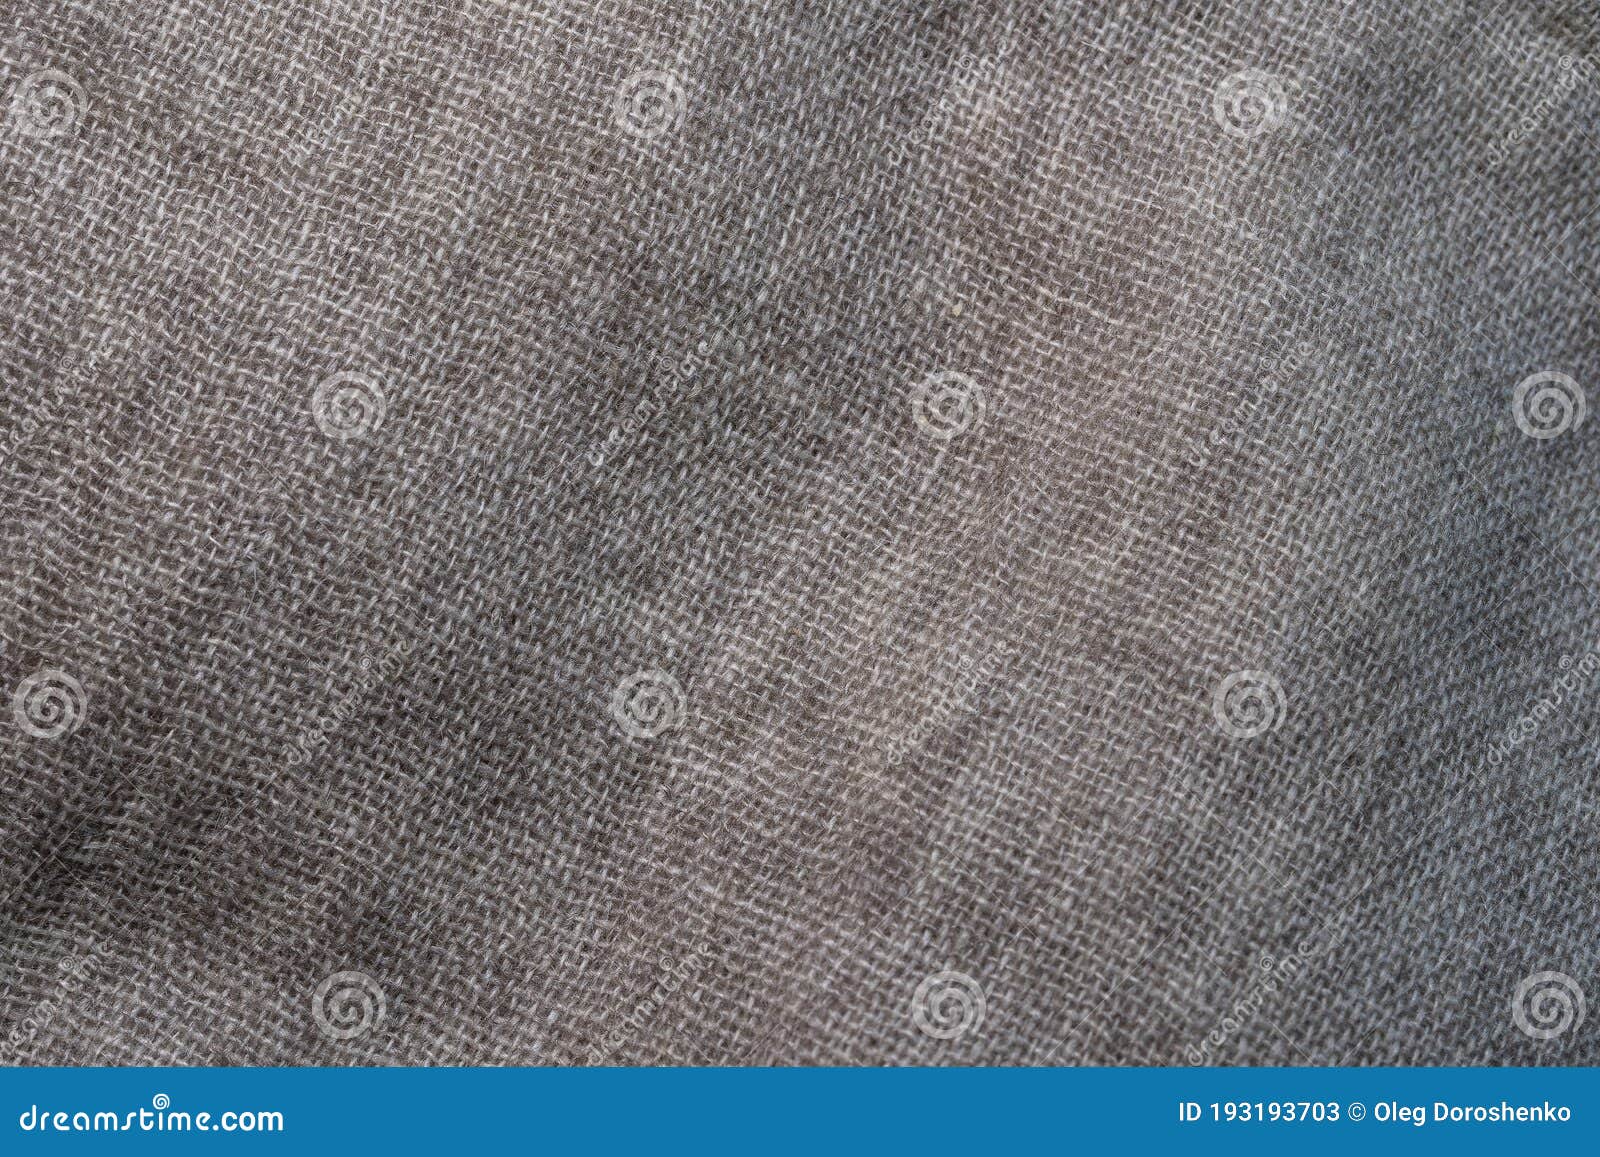 Crumpled Textile Texture As a Background. Natural Fabric Linen Texture ...